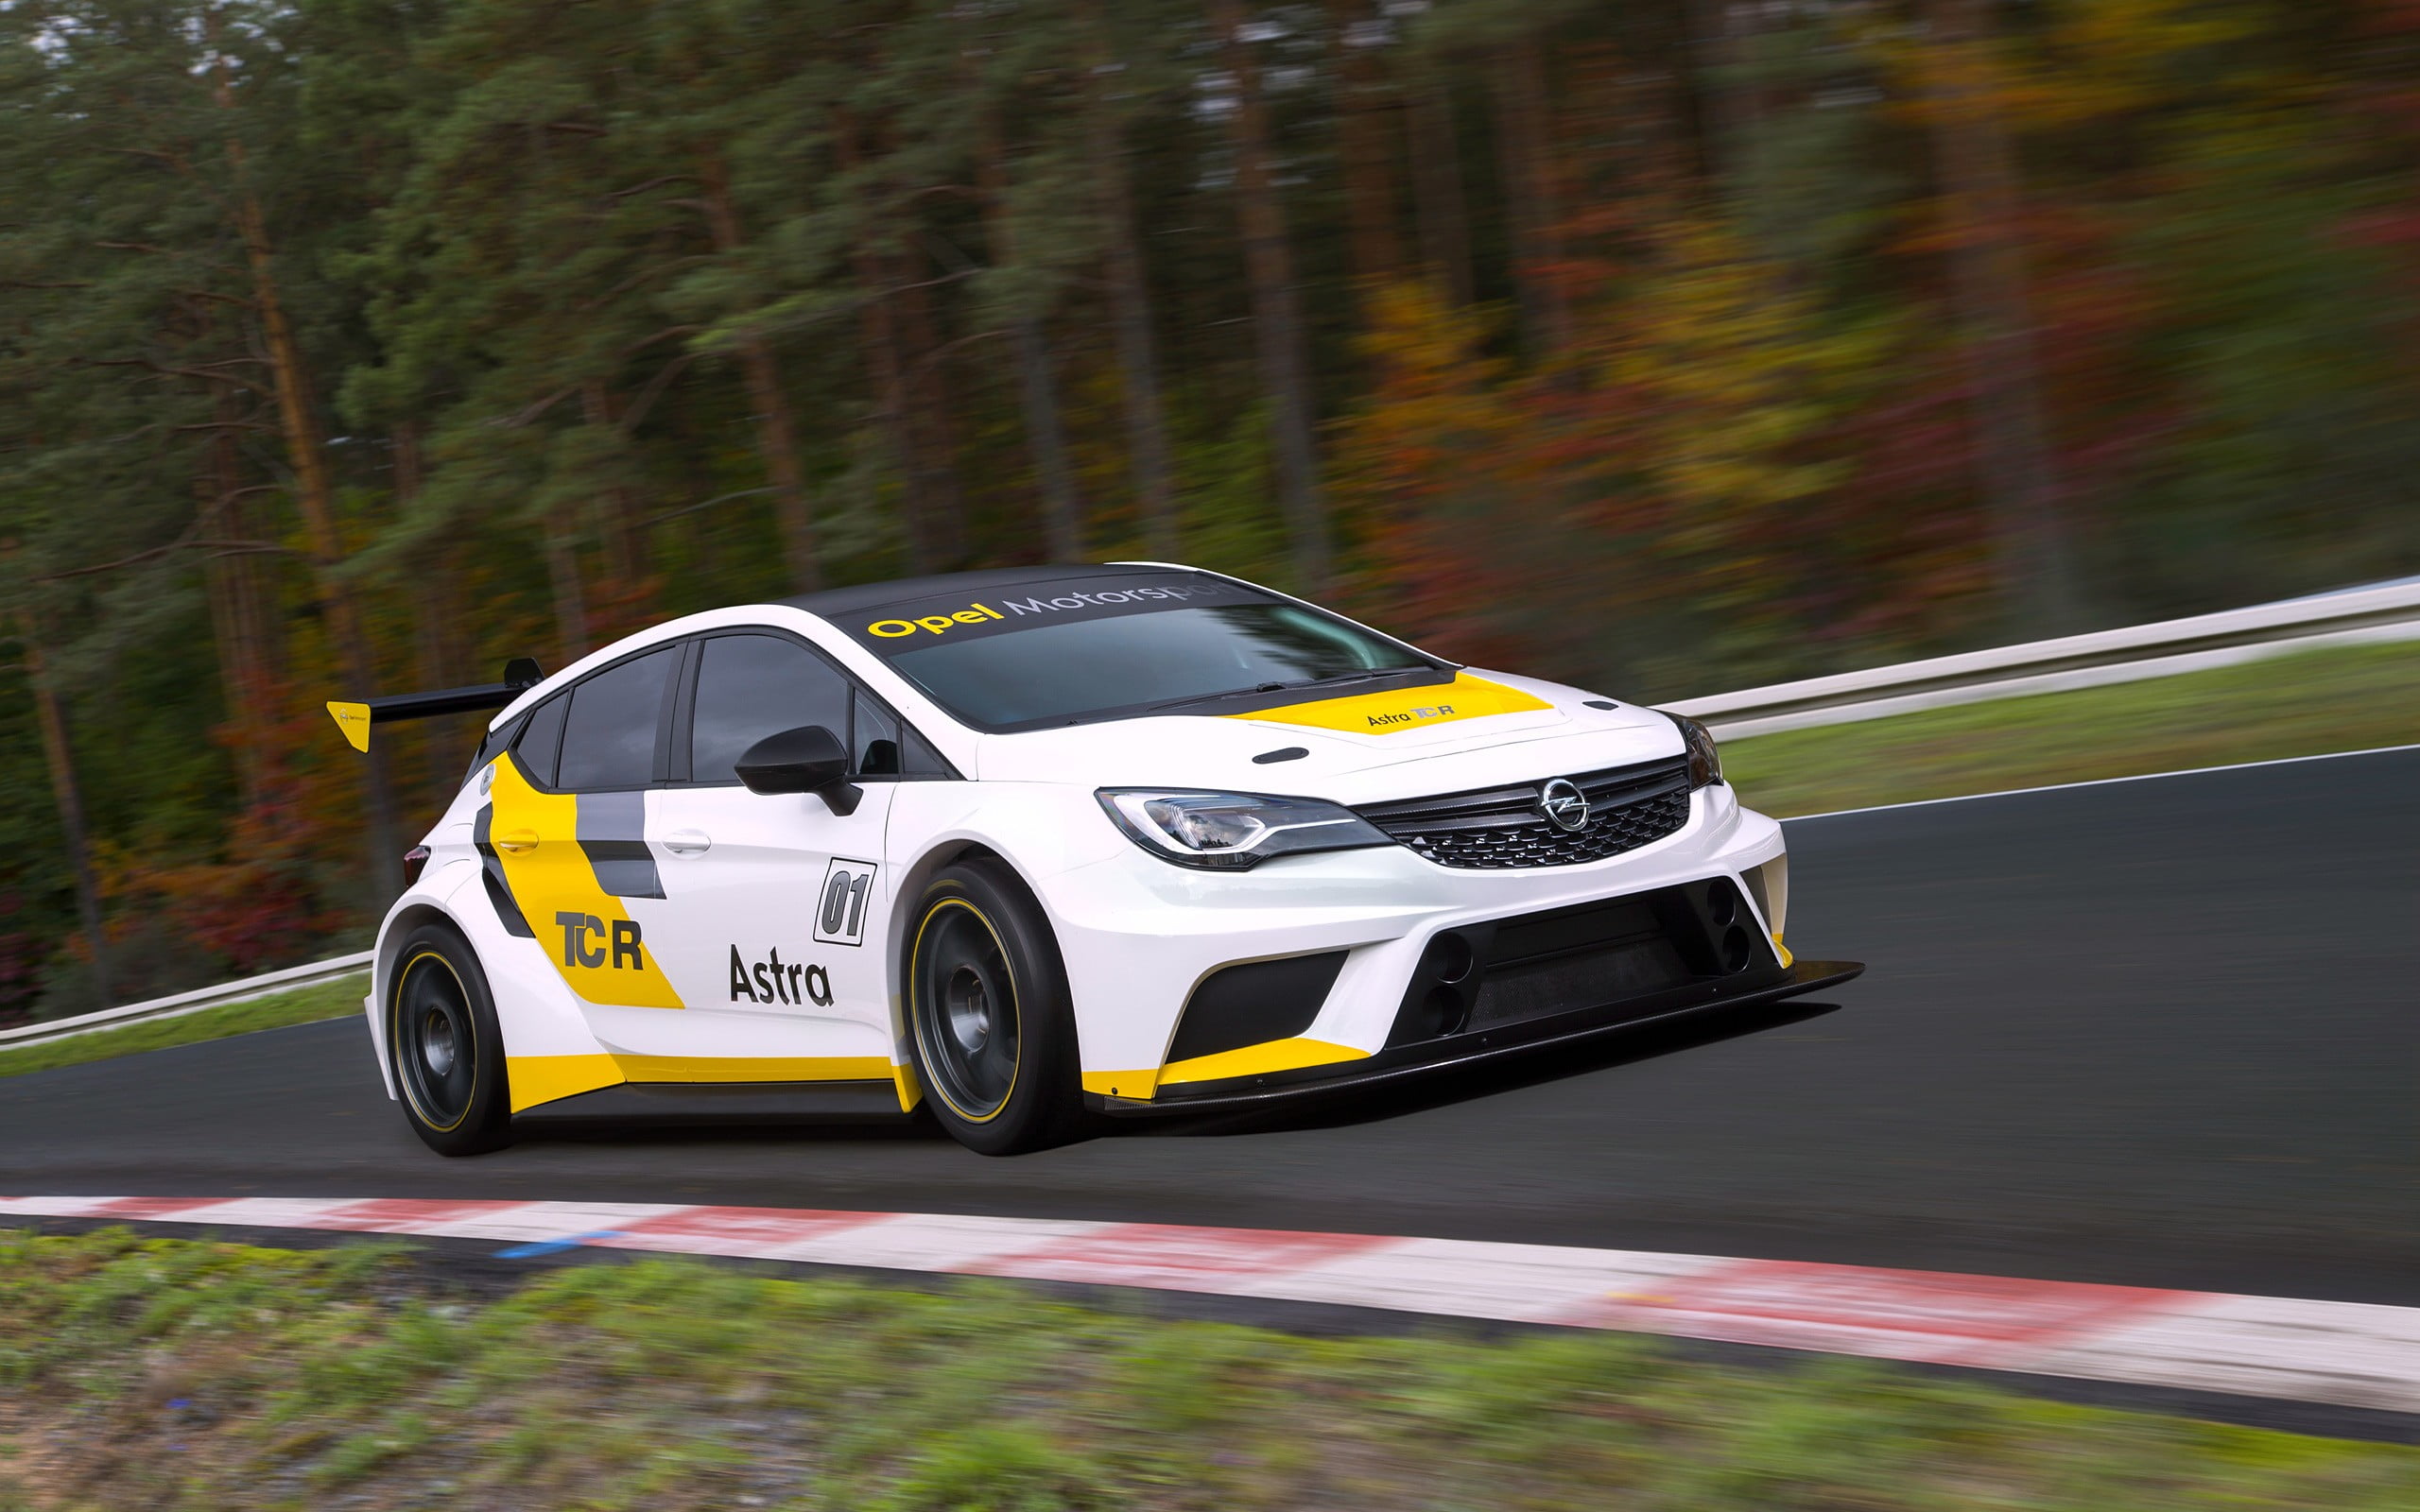 white and yellow sports car, Opel Astra TCR, car, race tracks, motion blur